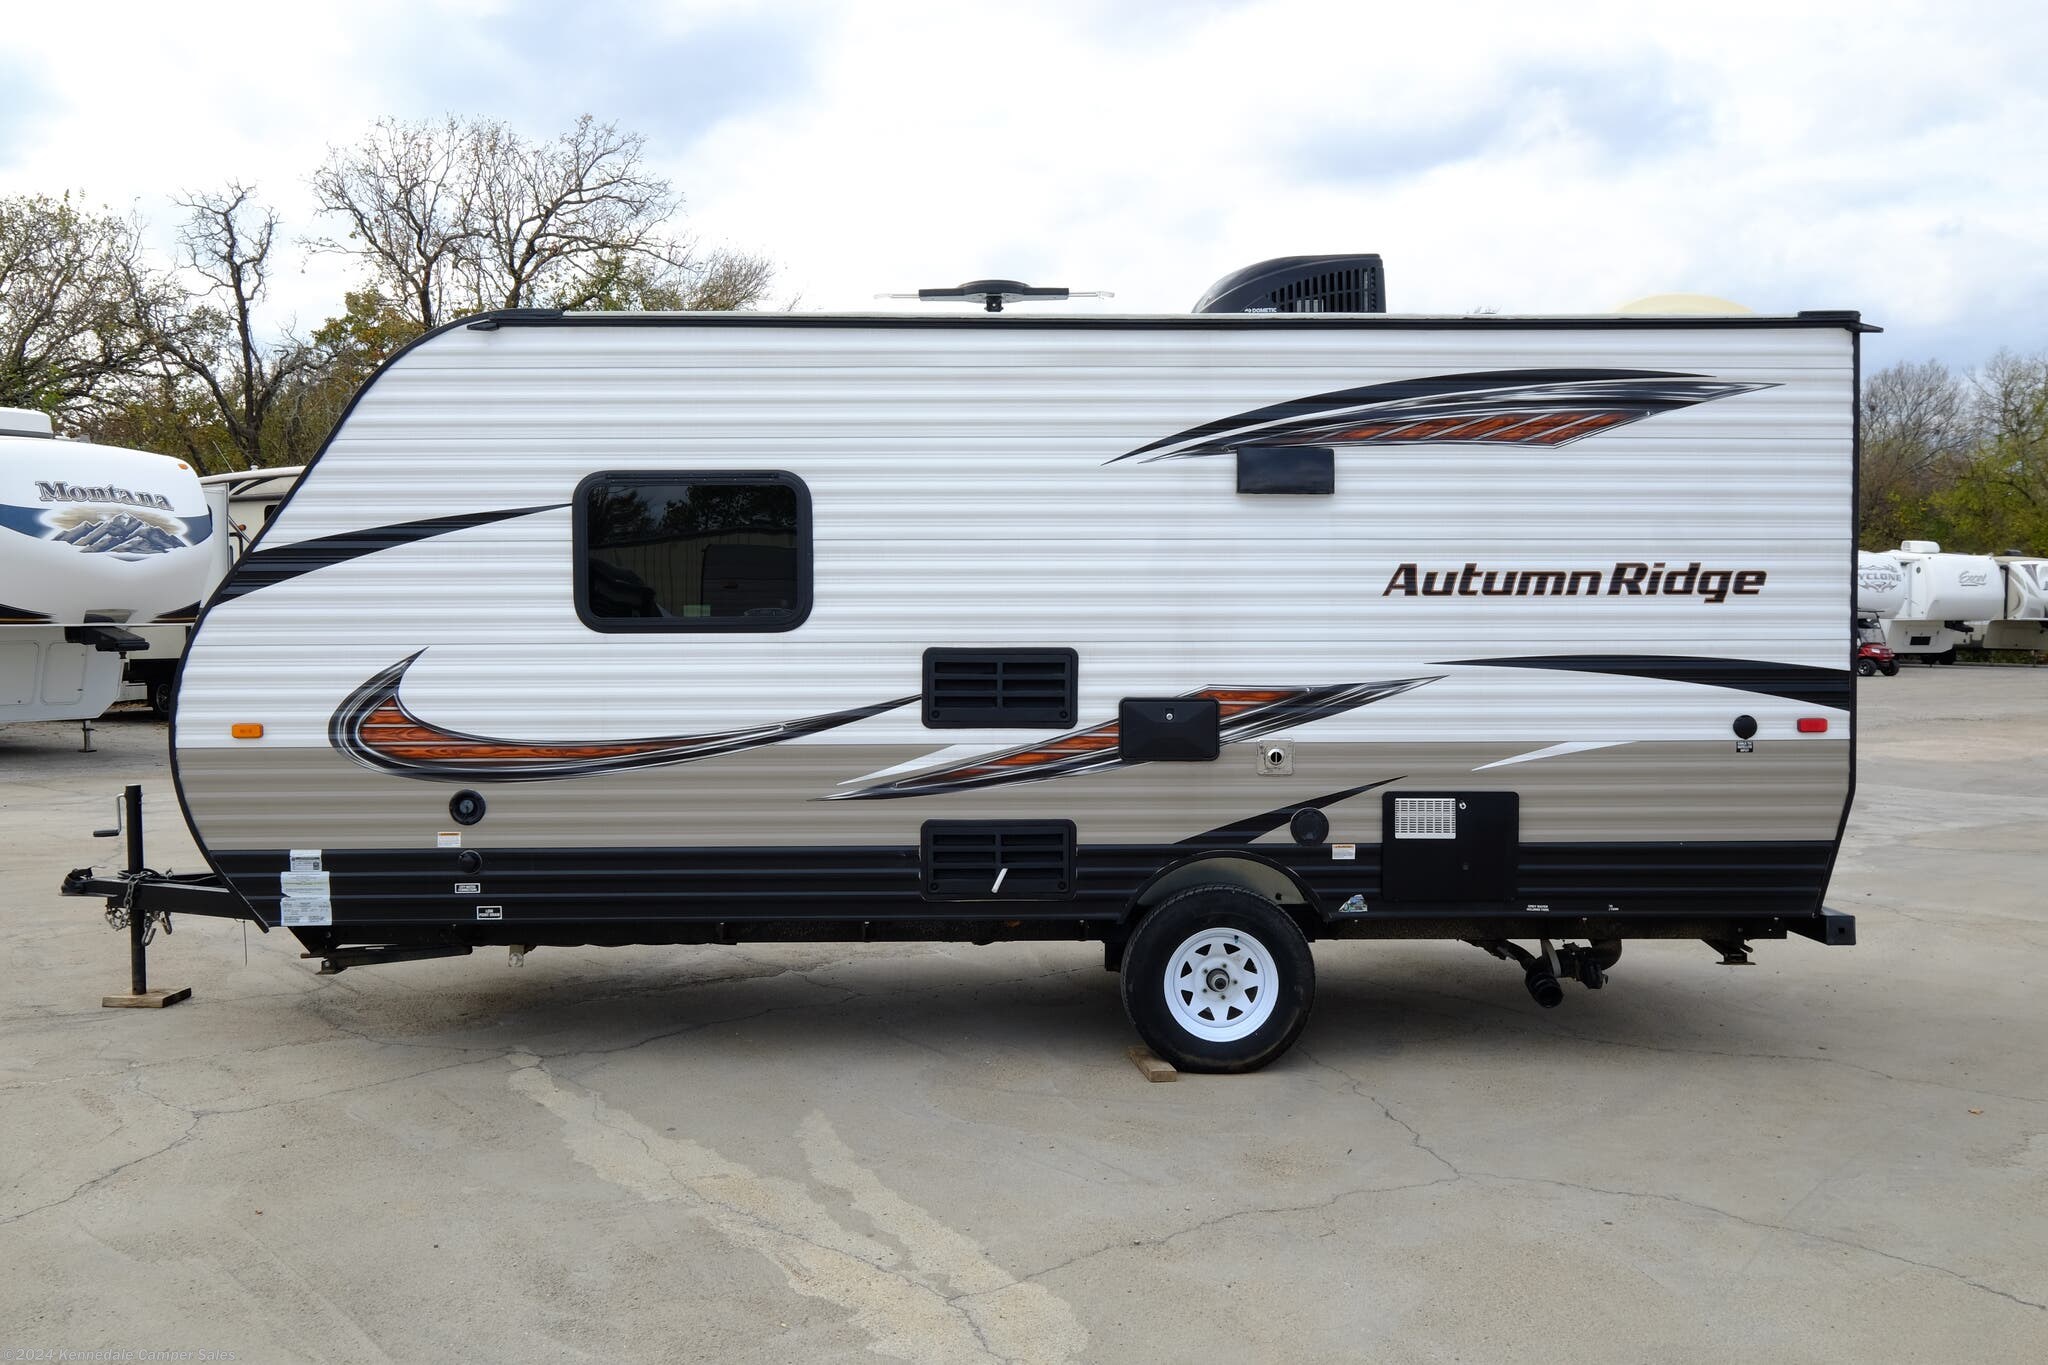 2018 Starcraft Autumn Ridge Outfitter 18QB RV for Sale in Kennedale, TX 76060 | ZP5132 | RVUSA 2018 Starcraft Autumn Ridge Outfitter 18qb Specs